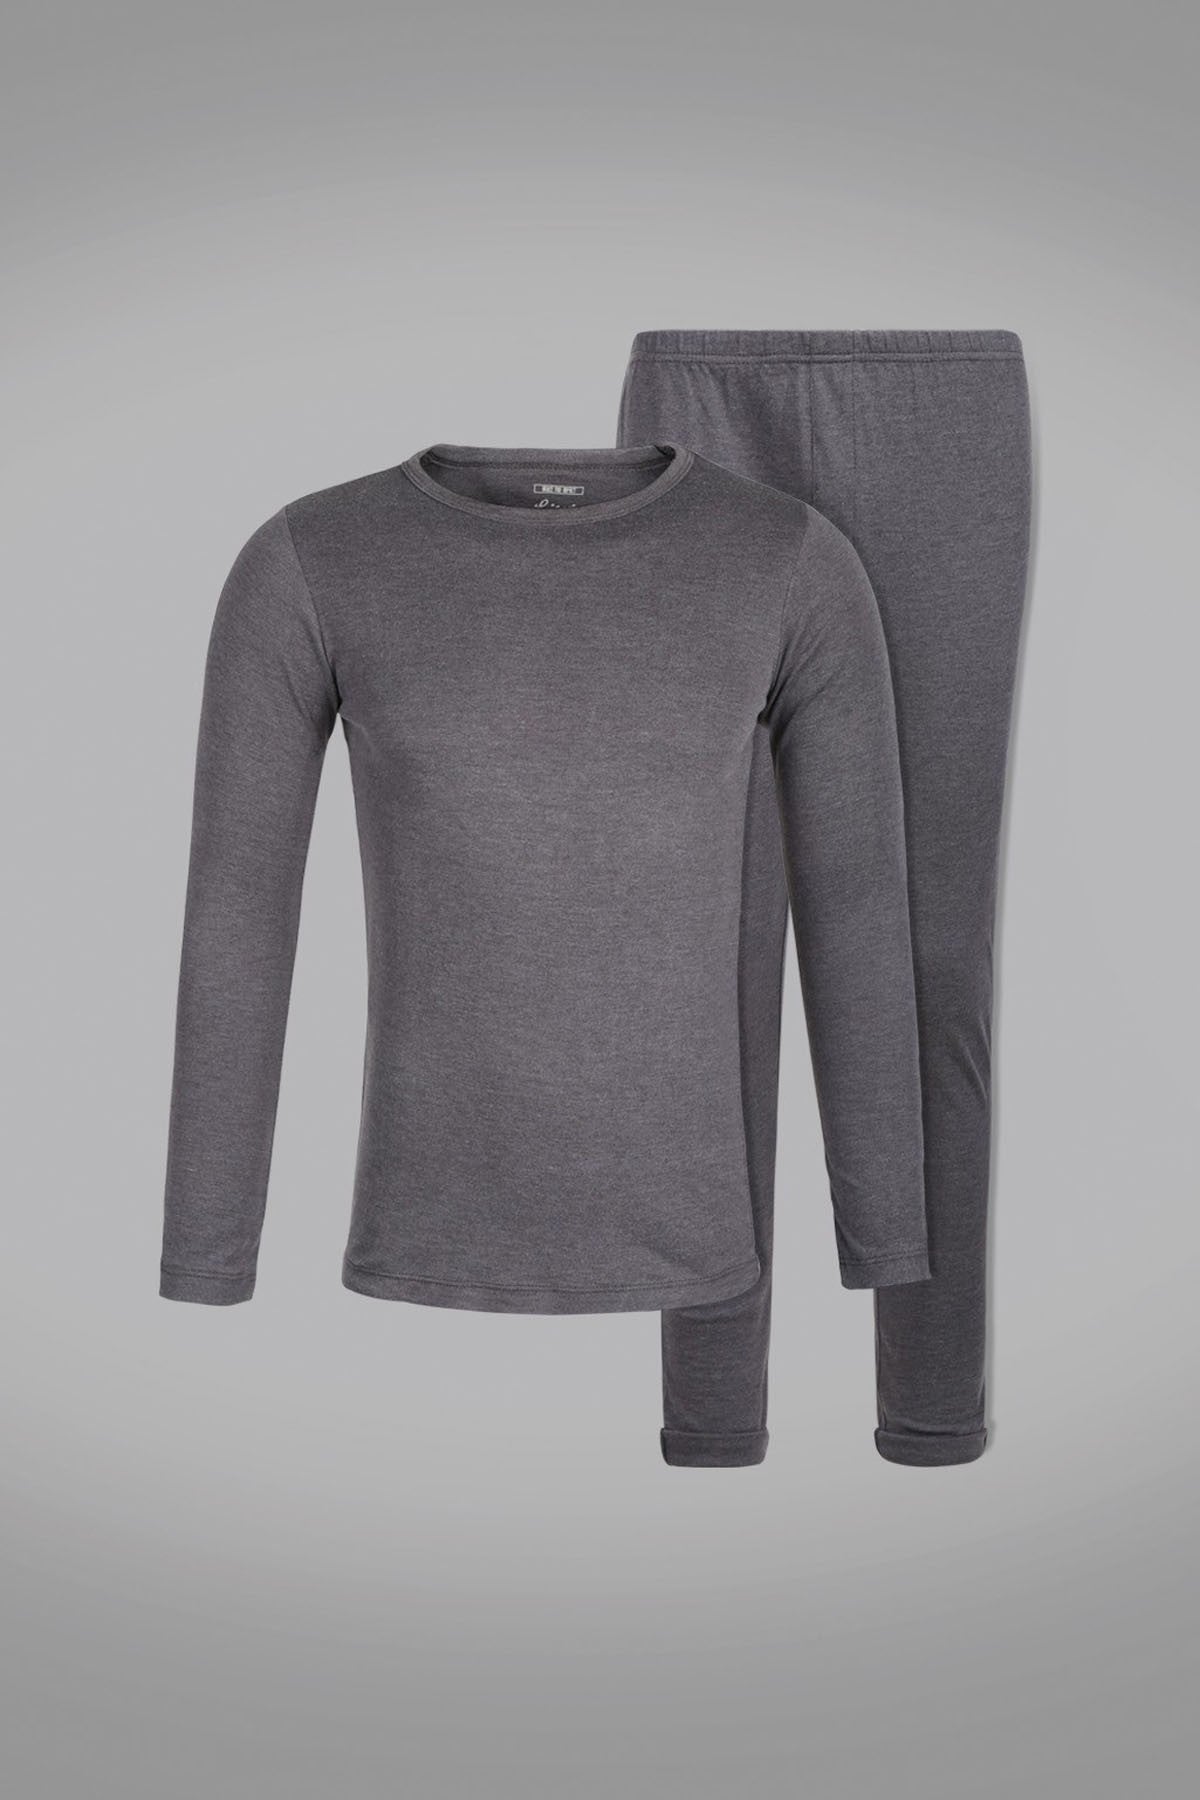 INNER WEAR THERMAL – Leisure Club Official